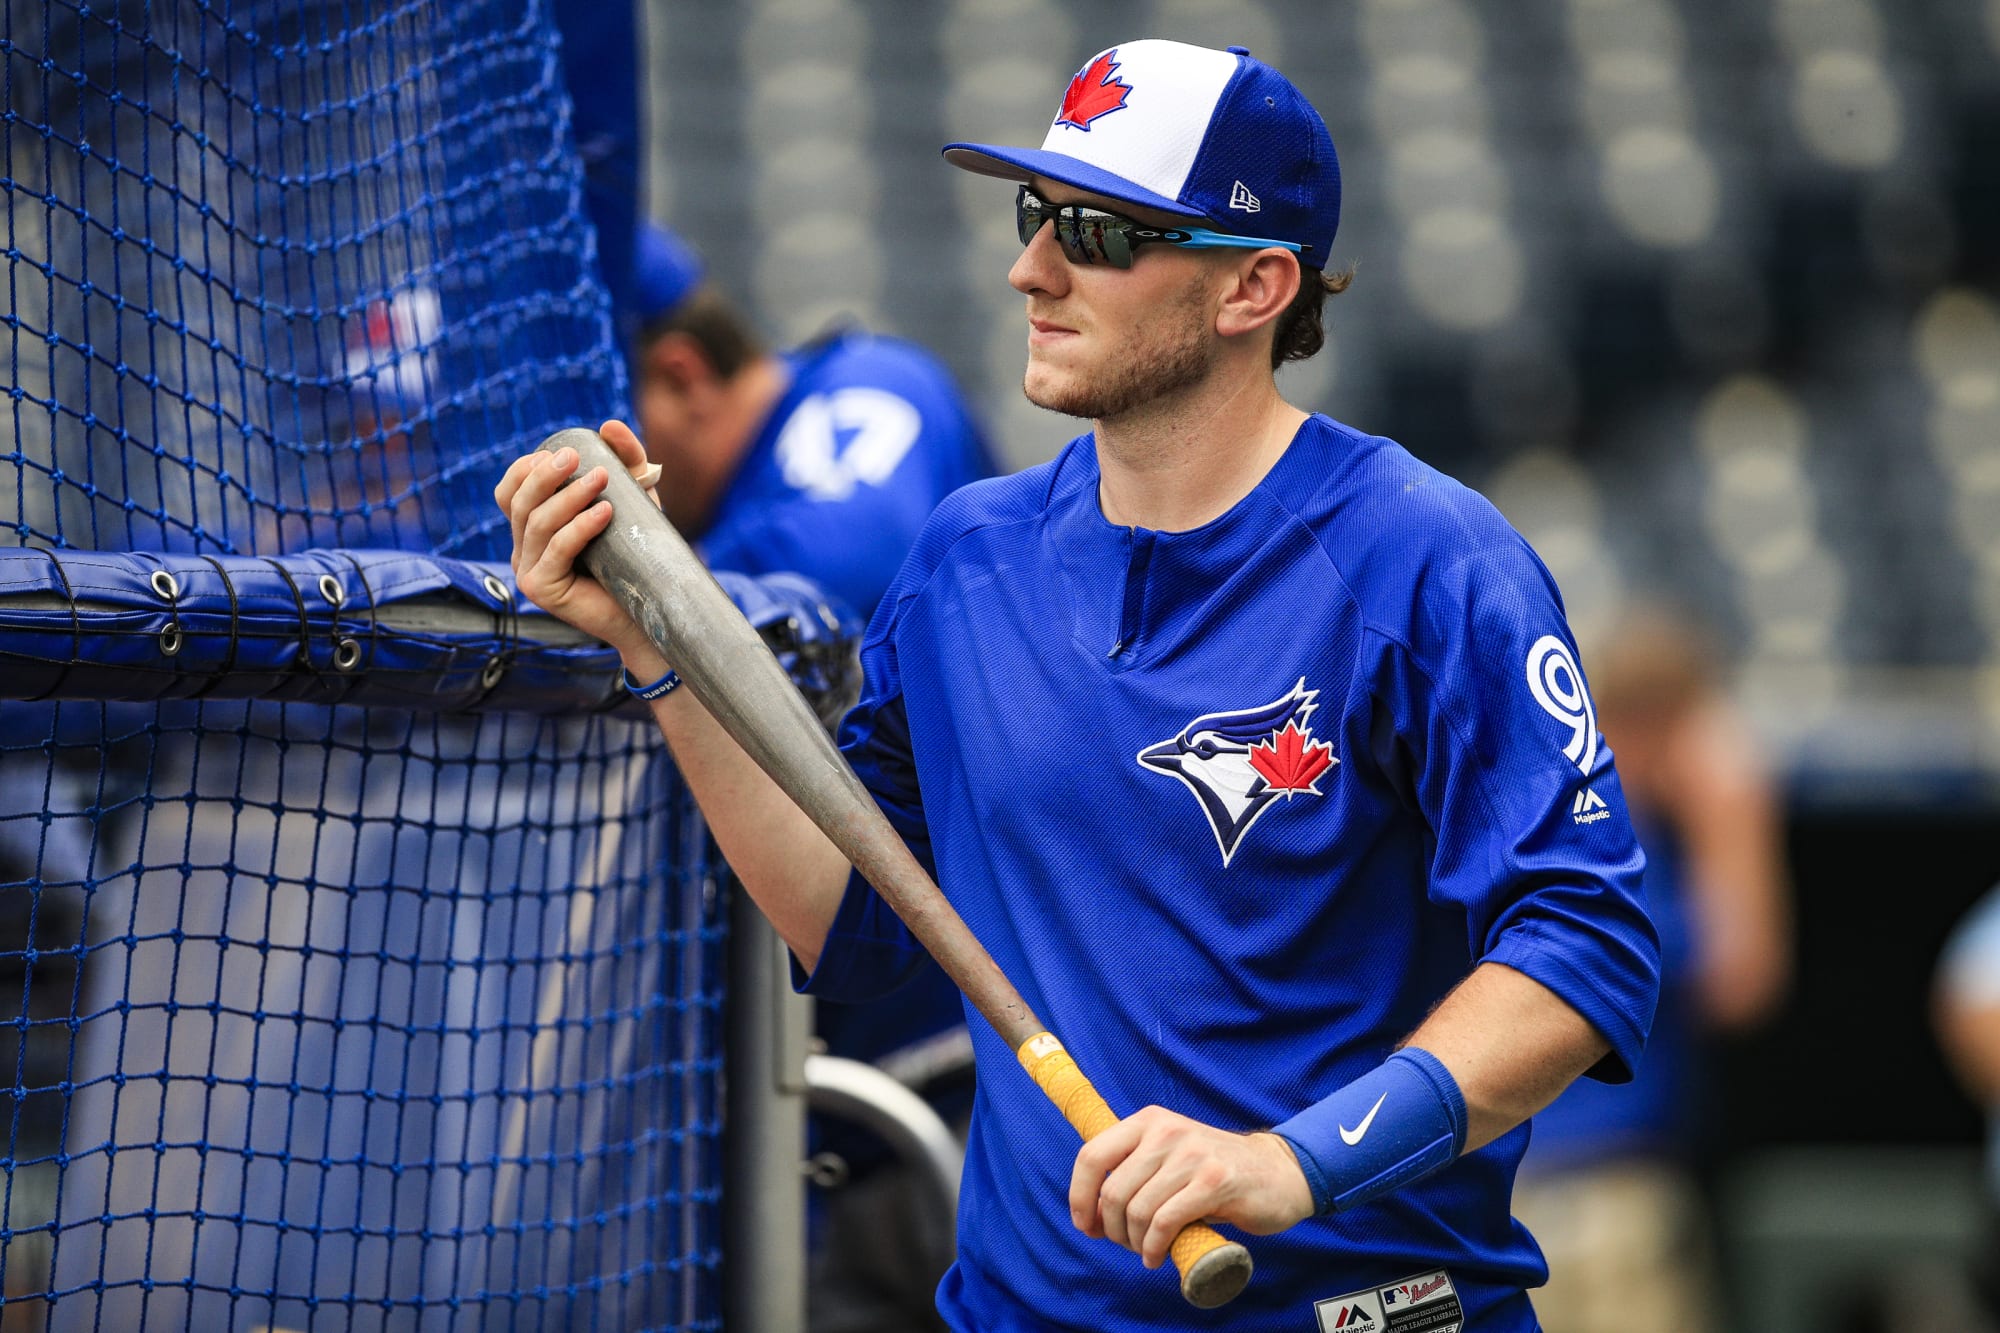 Toronto Blue Jays: Danny Jansen continues to show potential